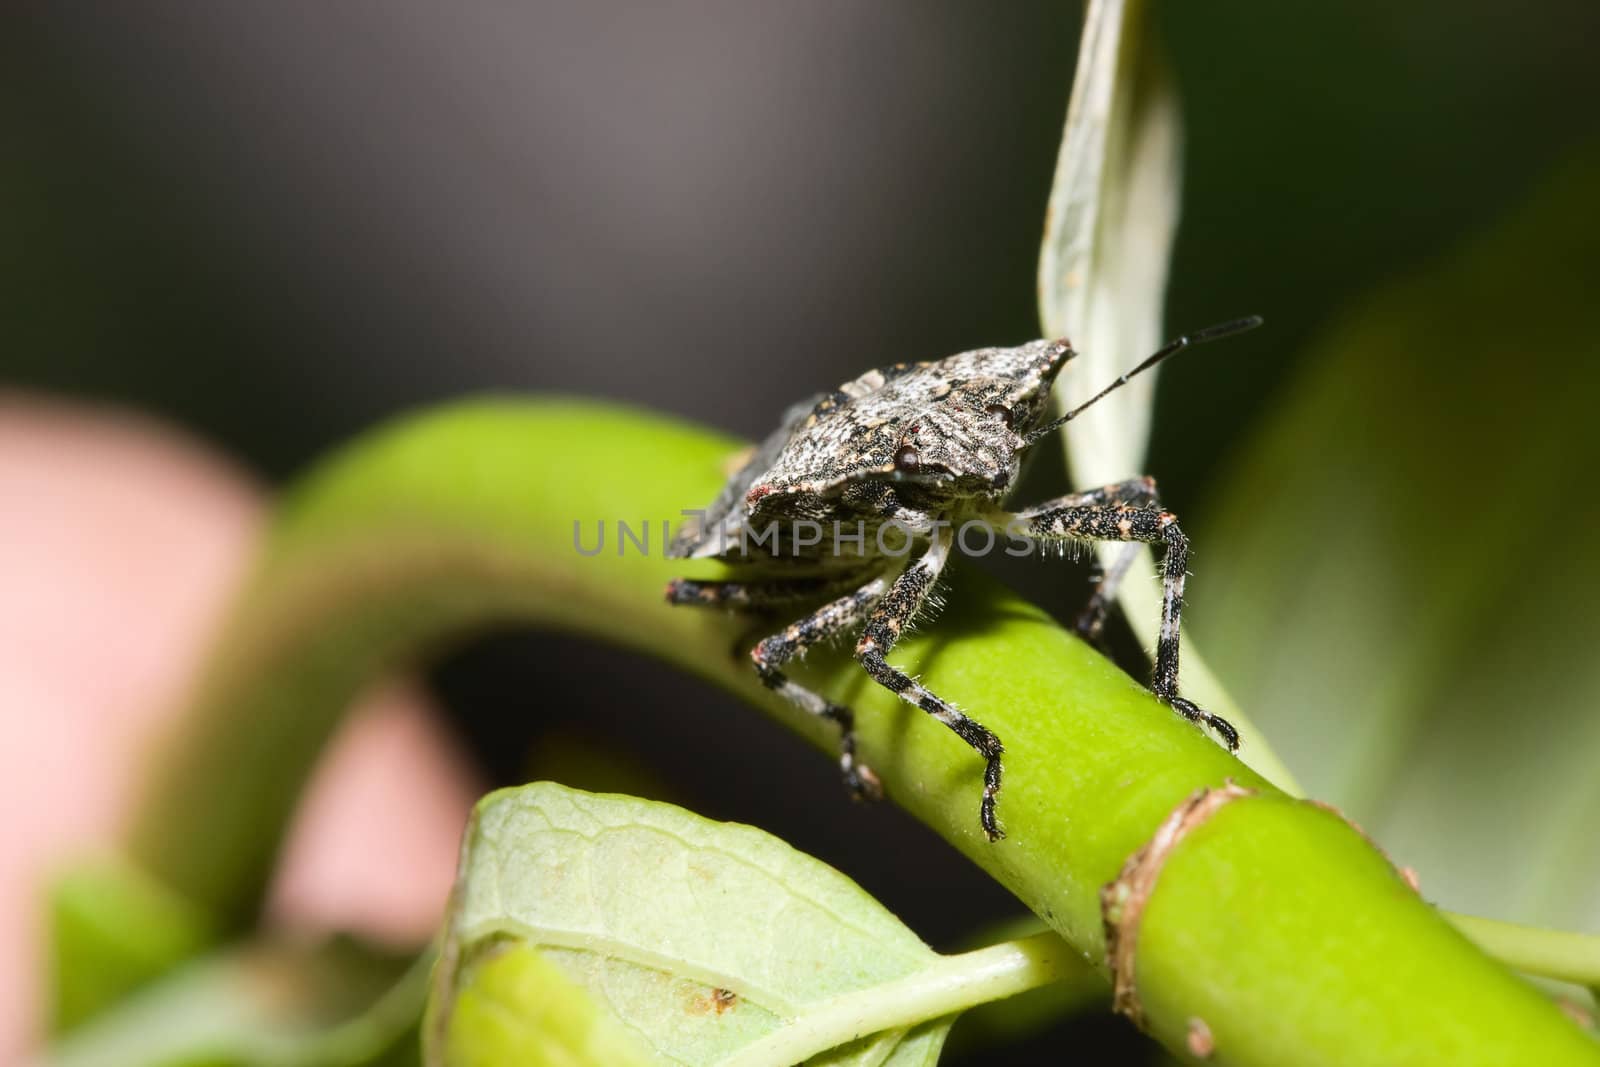 Shield bugs, also known as stink bugs, walking on a plant.